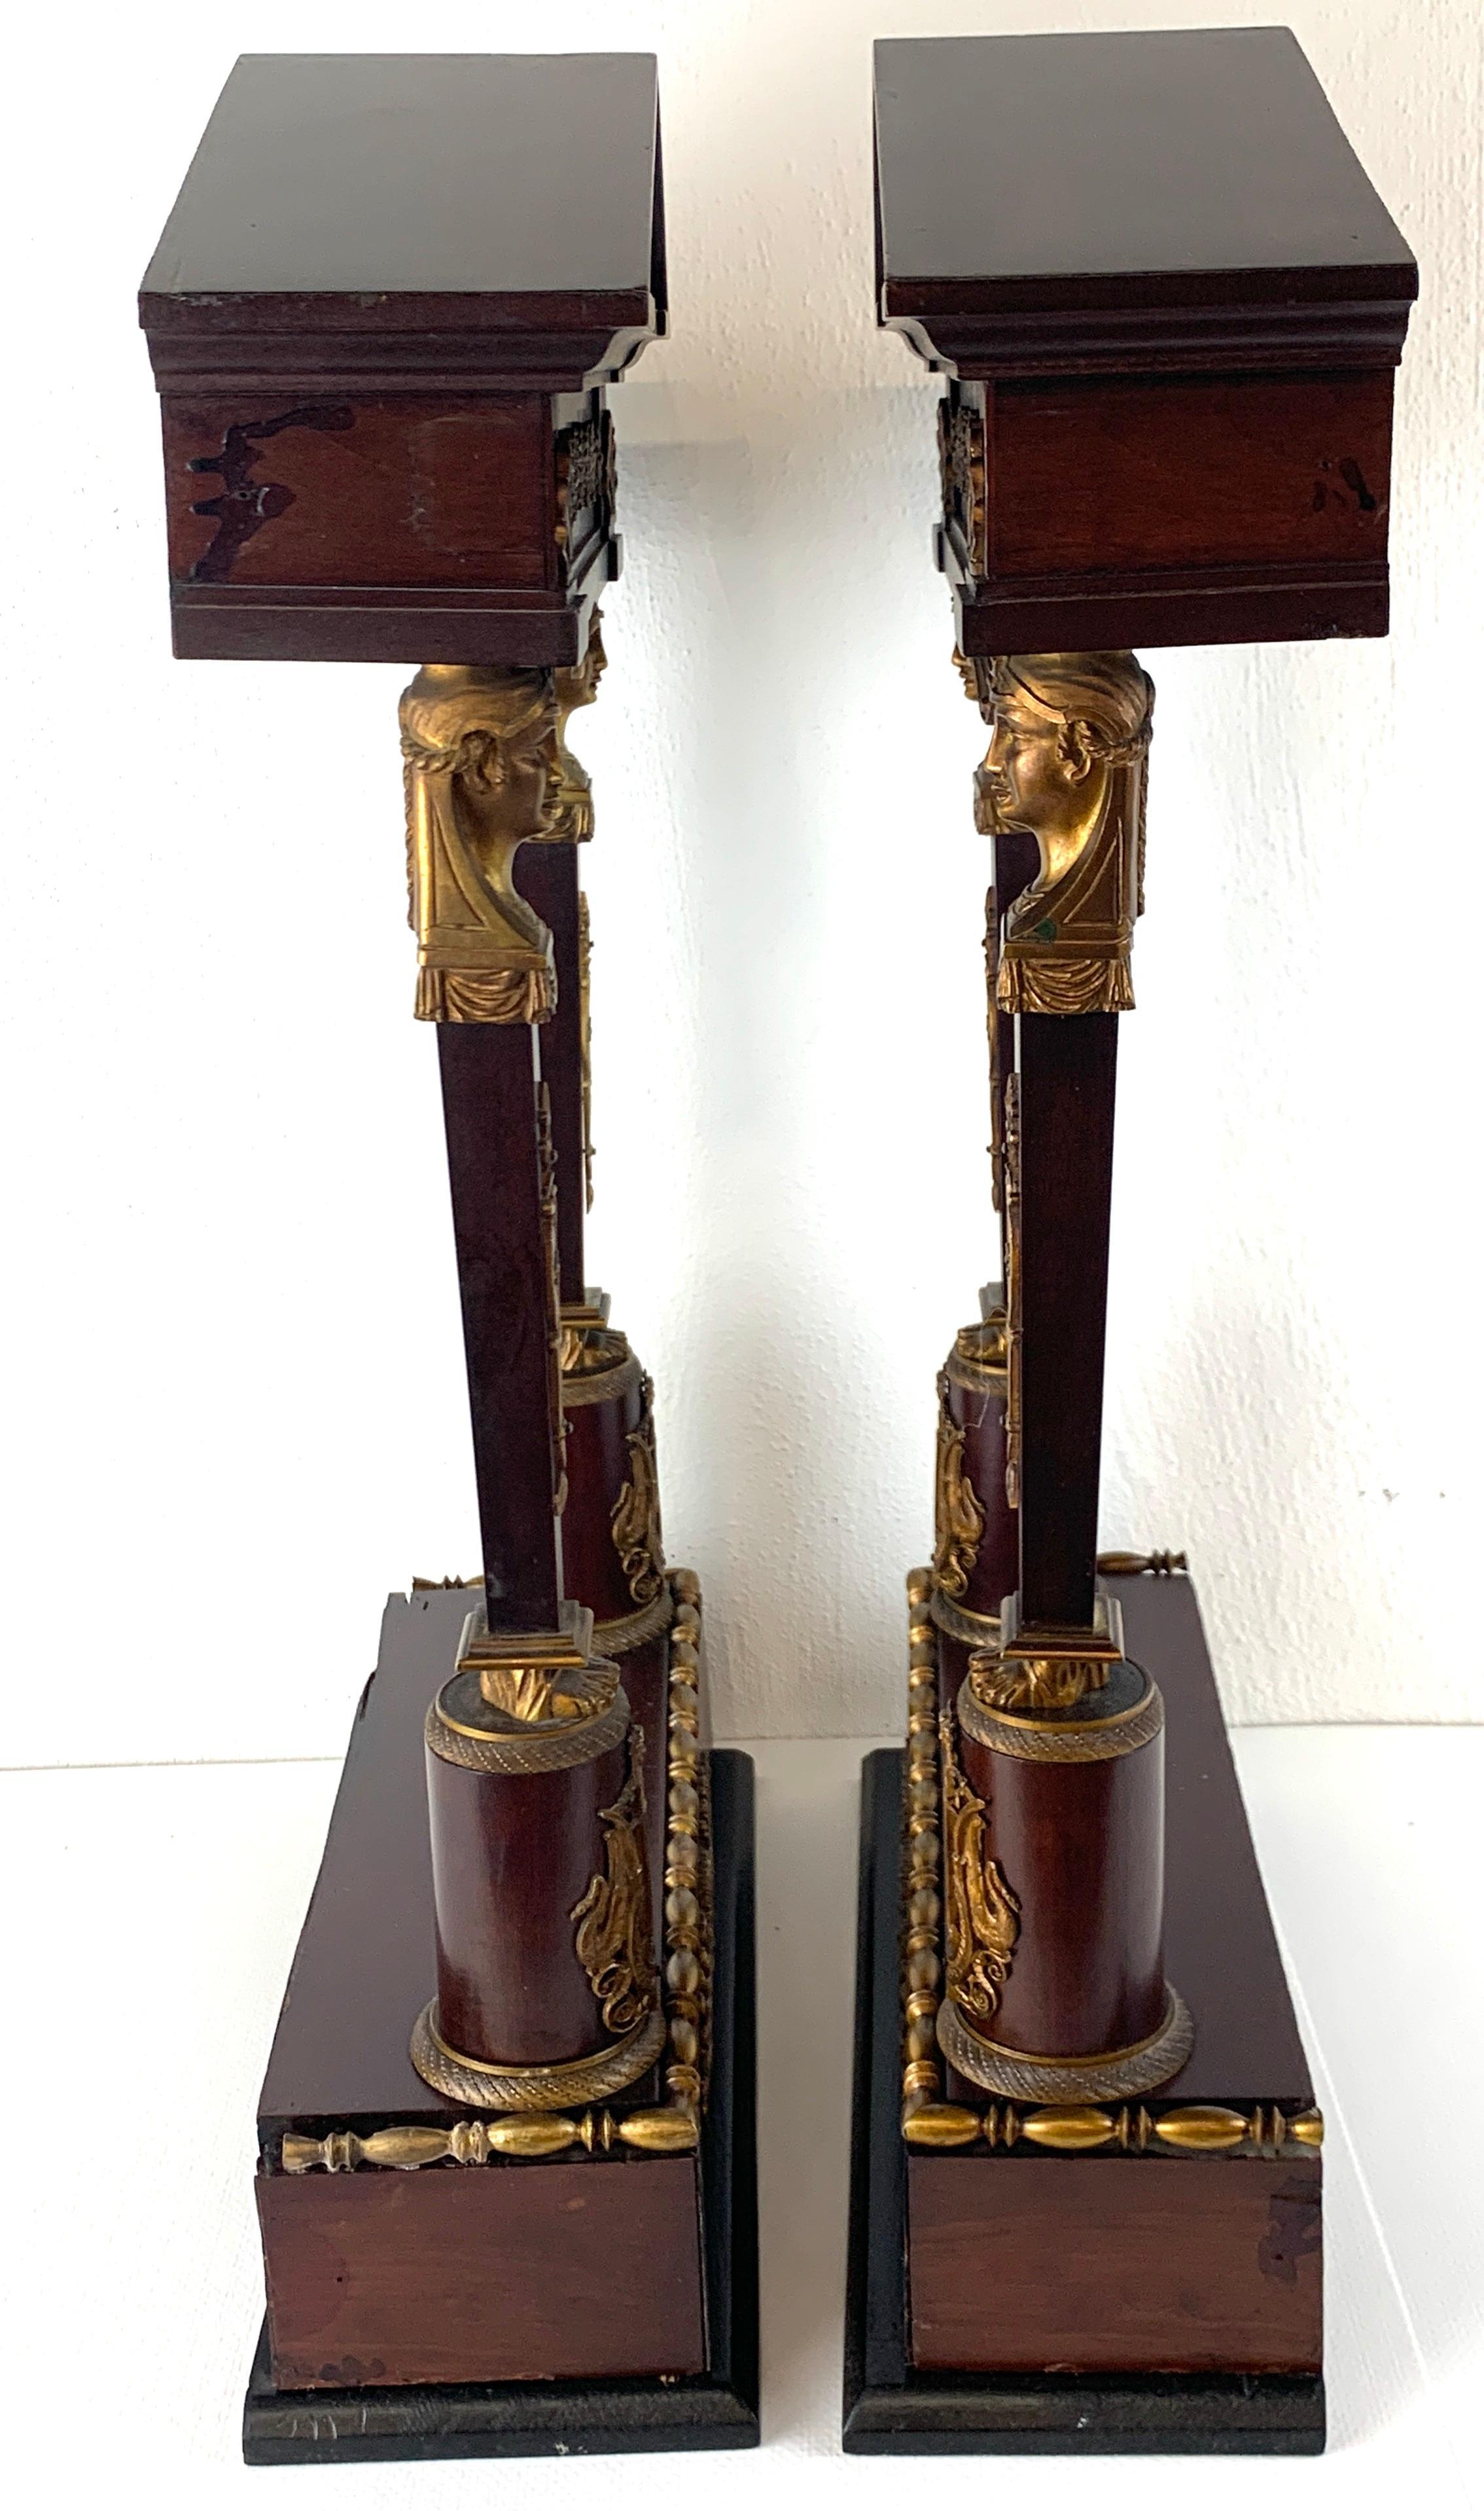 Empire Revival Pair of Second Empire Caryatid Wall Ormolu Mounted Wall Shelves For Sale